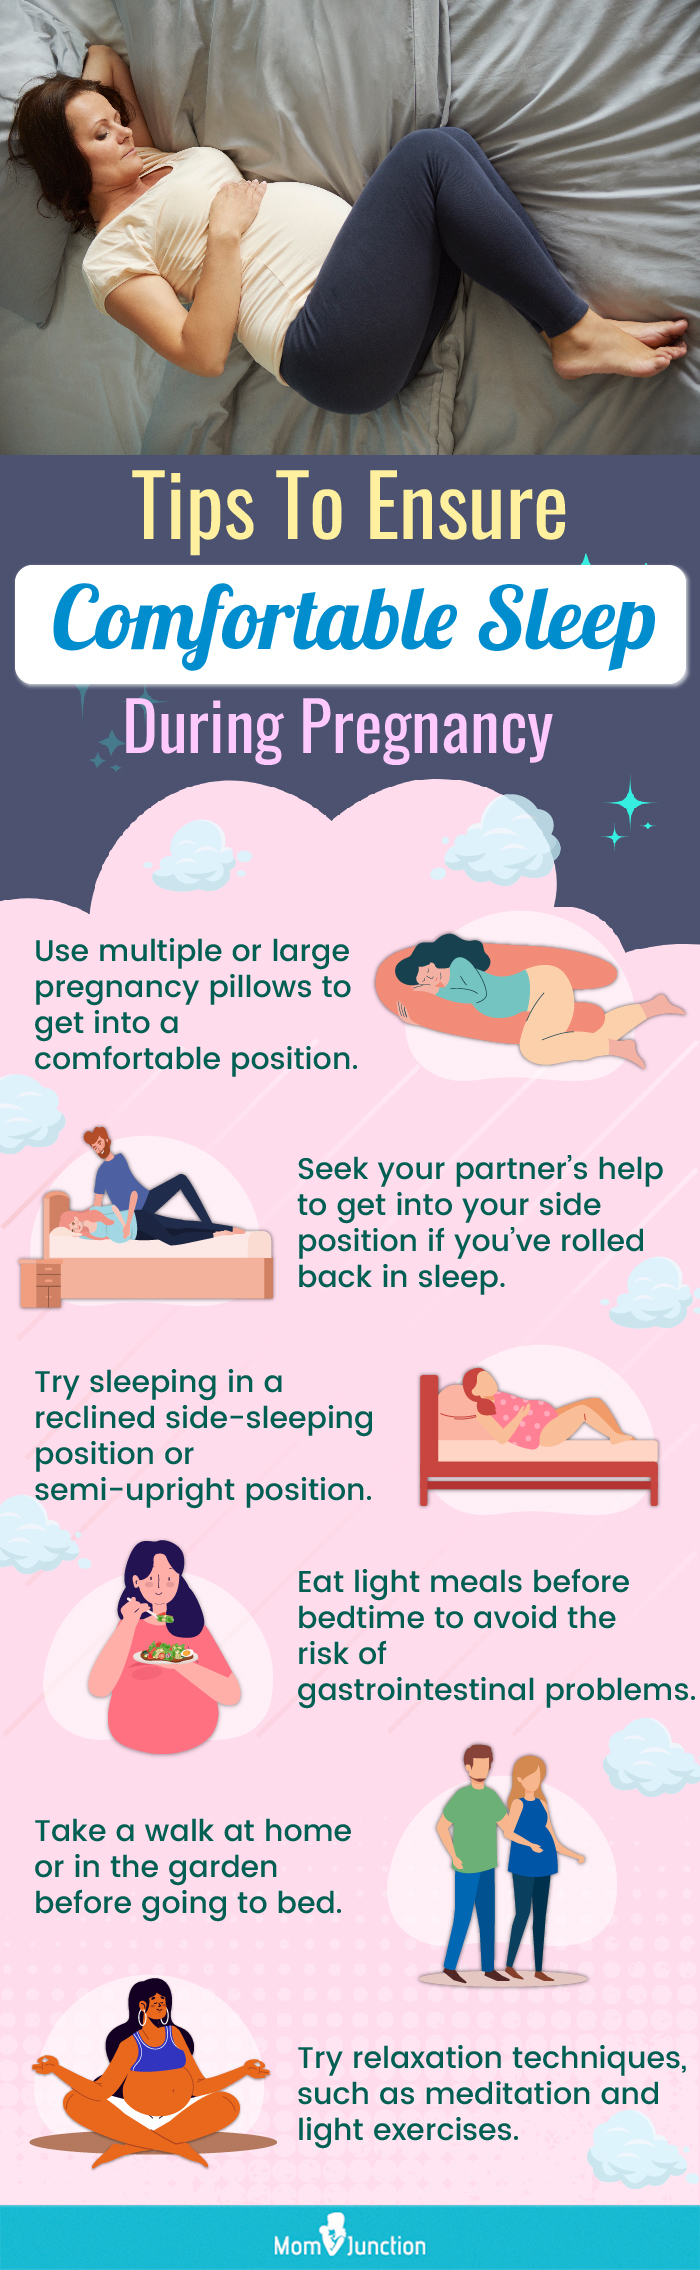 7 Important Sleeping Tips During Third Trimester